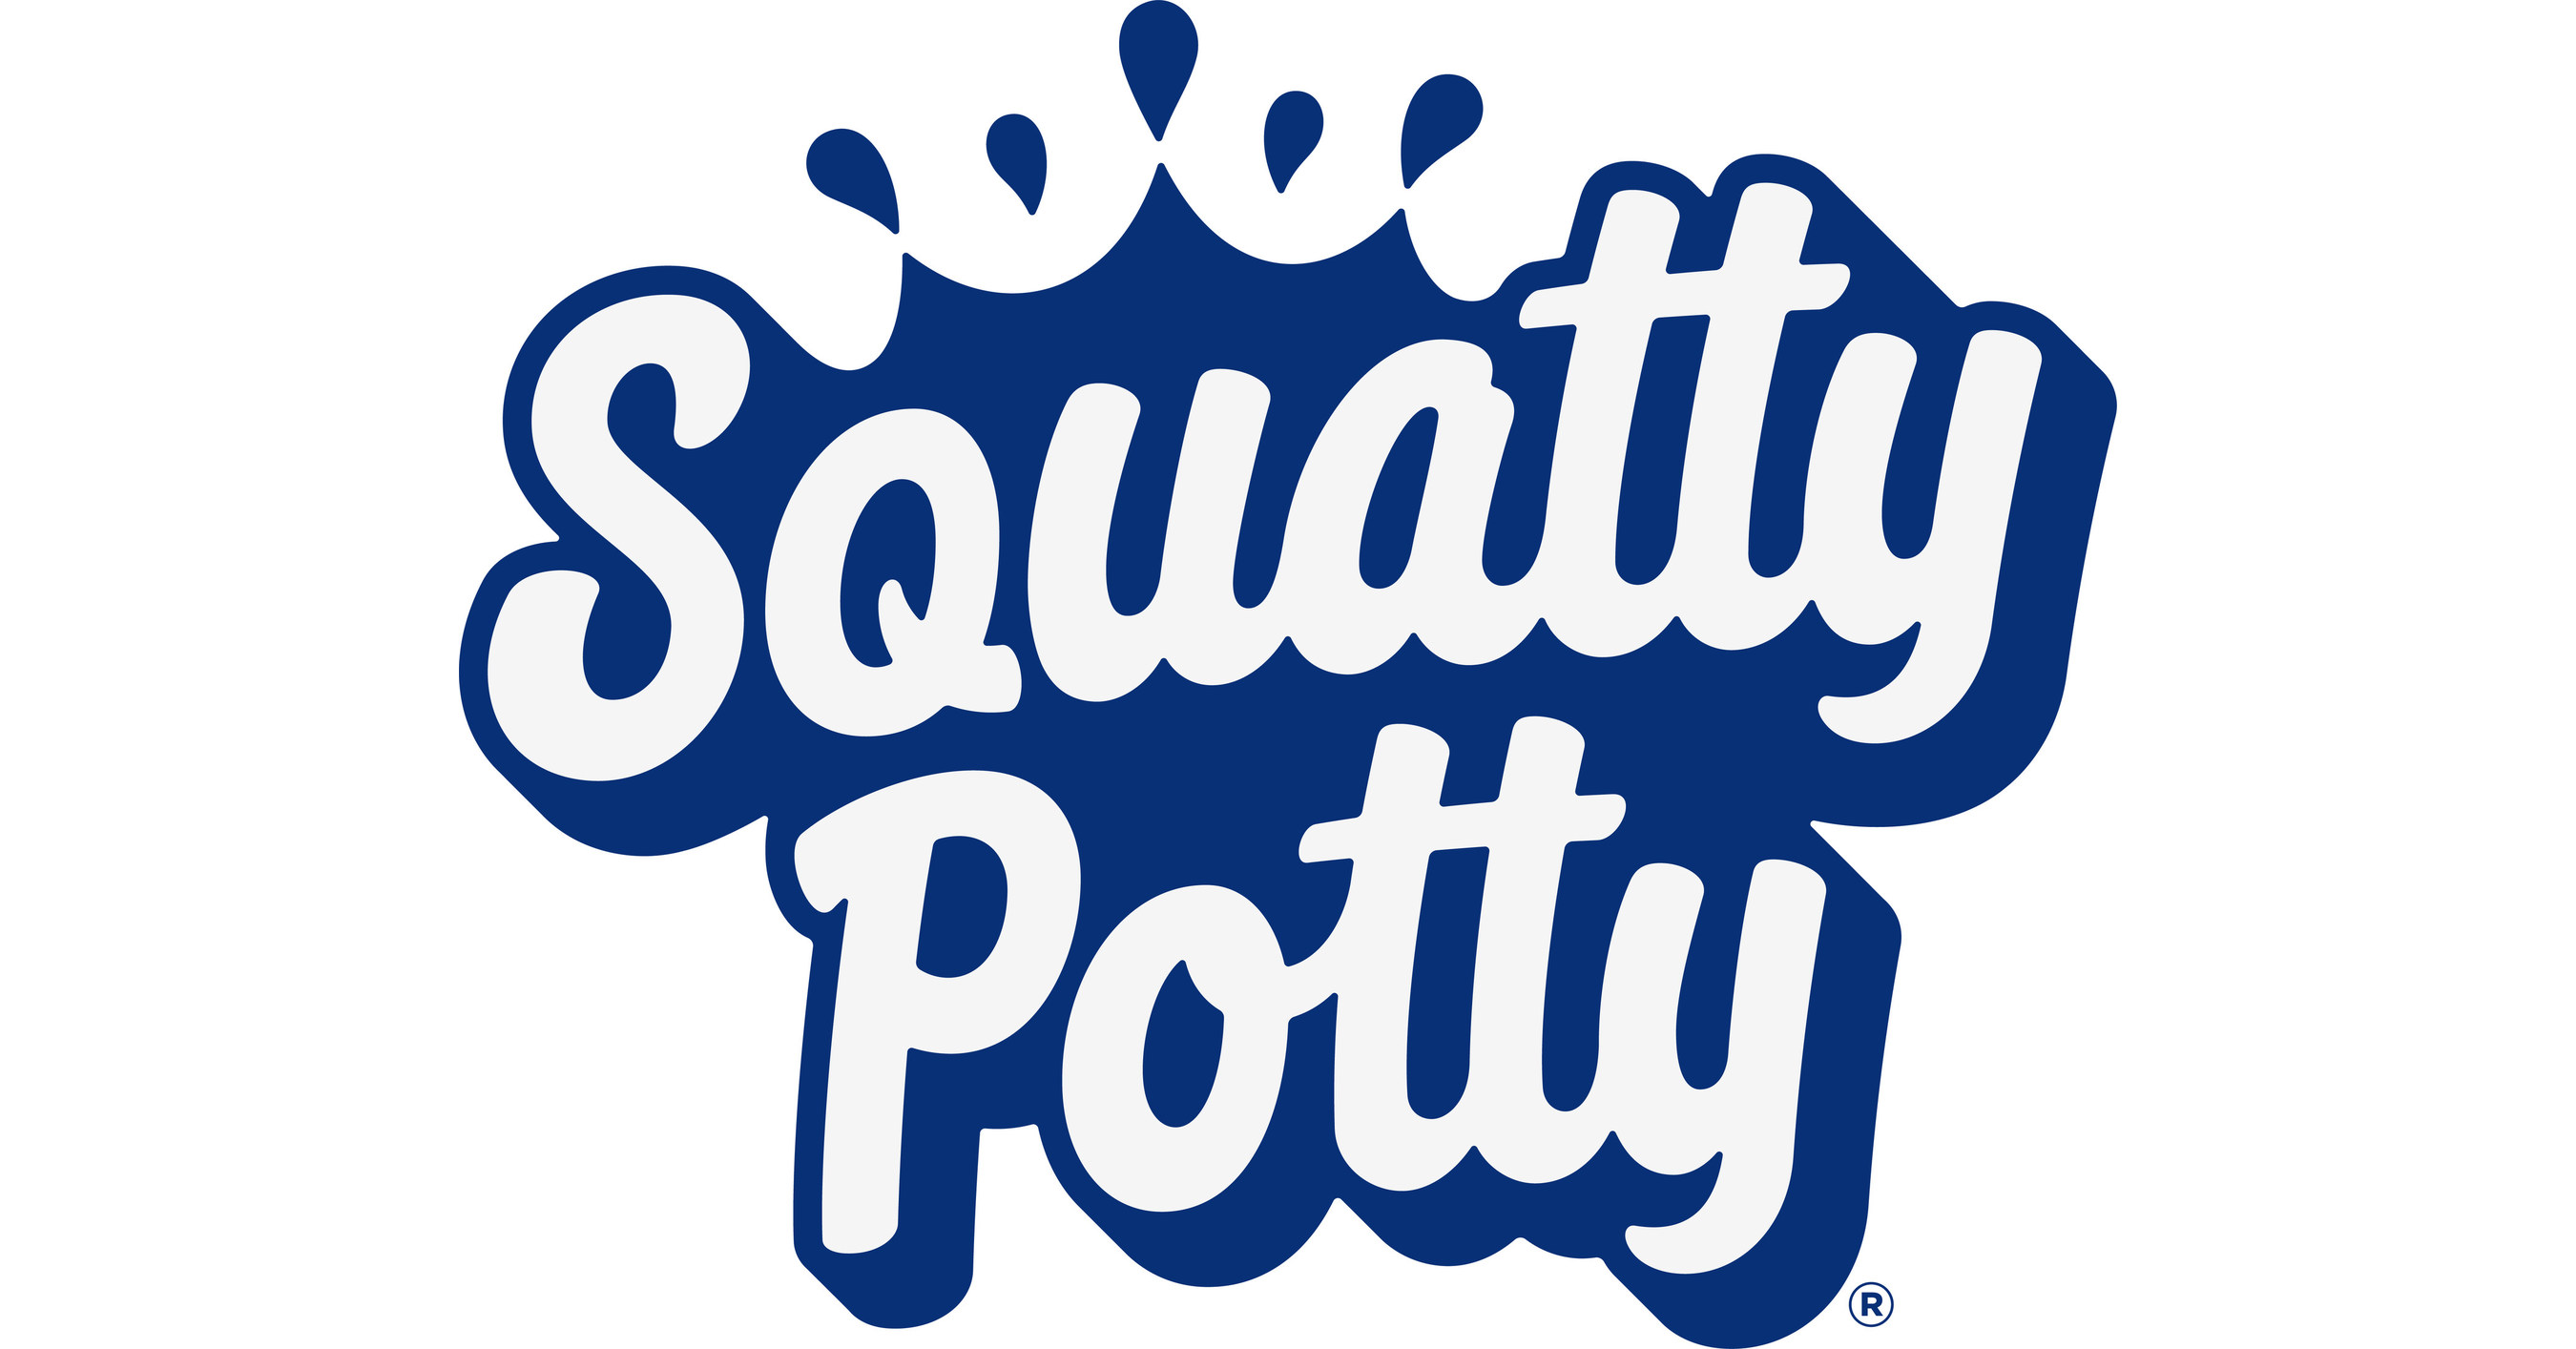 I Tried a Squatty Potty Toilet Stool and Couldn't Believe the Results